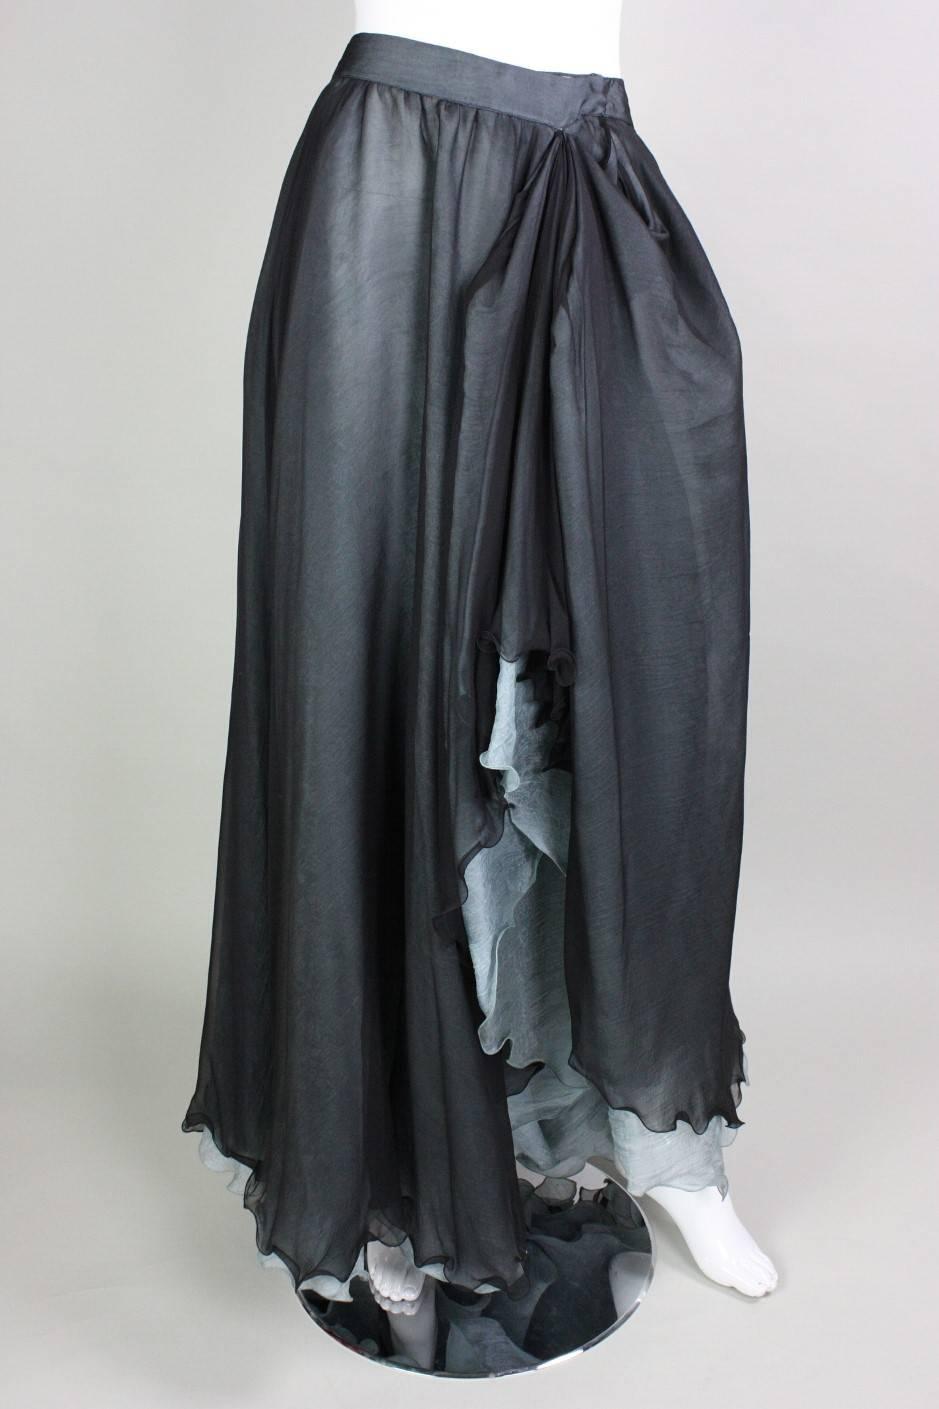 Vintage skirt from Giorgio Armani likely dates to the 1990's and is made of two layers of silk.  Under layer is a baby blue silk jacquard with a floral pattern.  Over layer appears to be black silk organza.  Side front of skirt has been stitched at